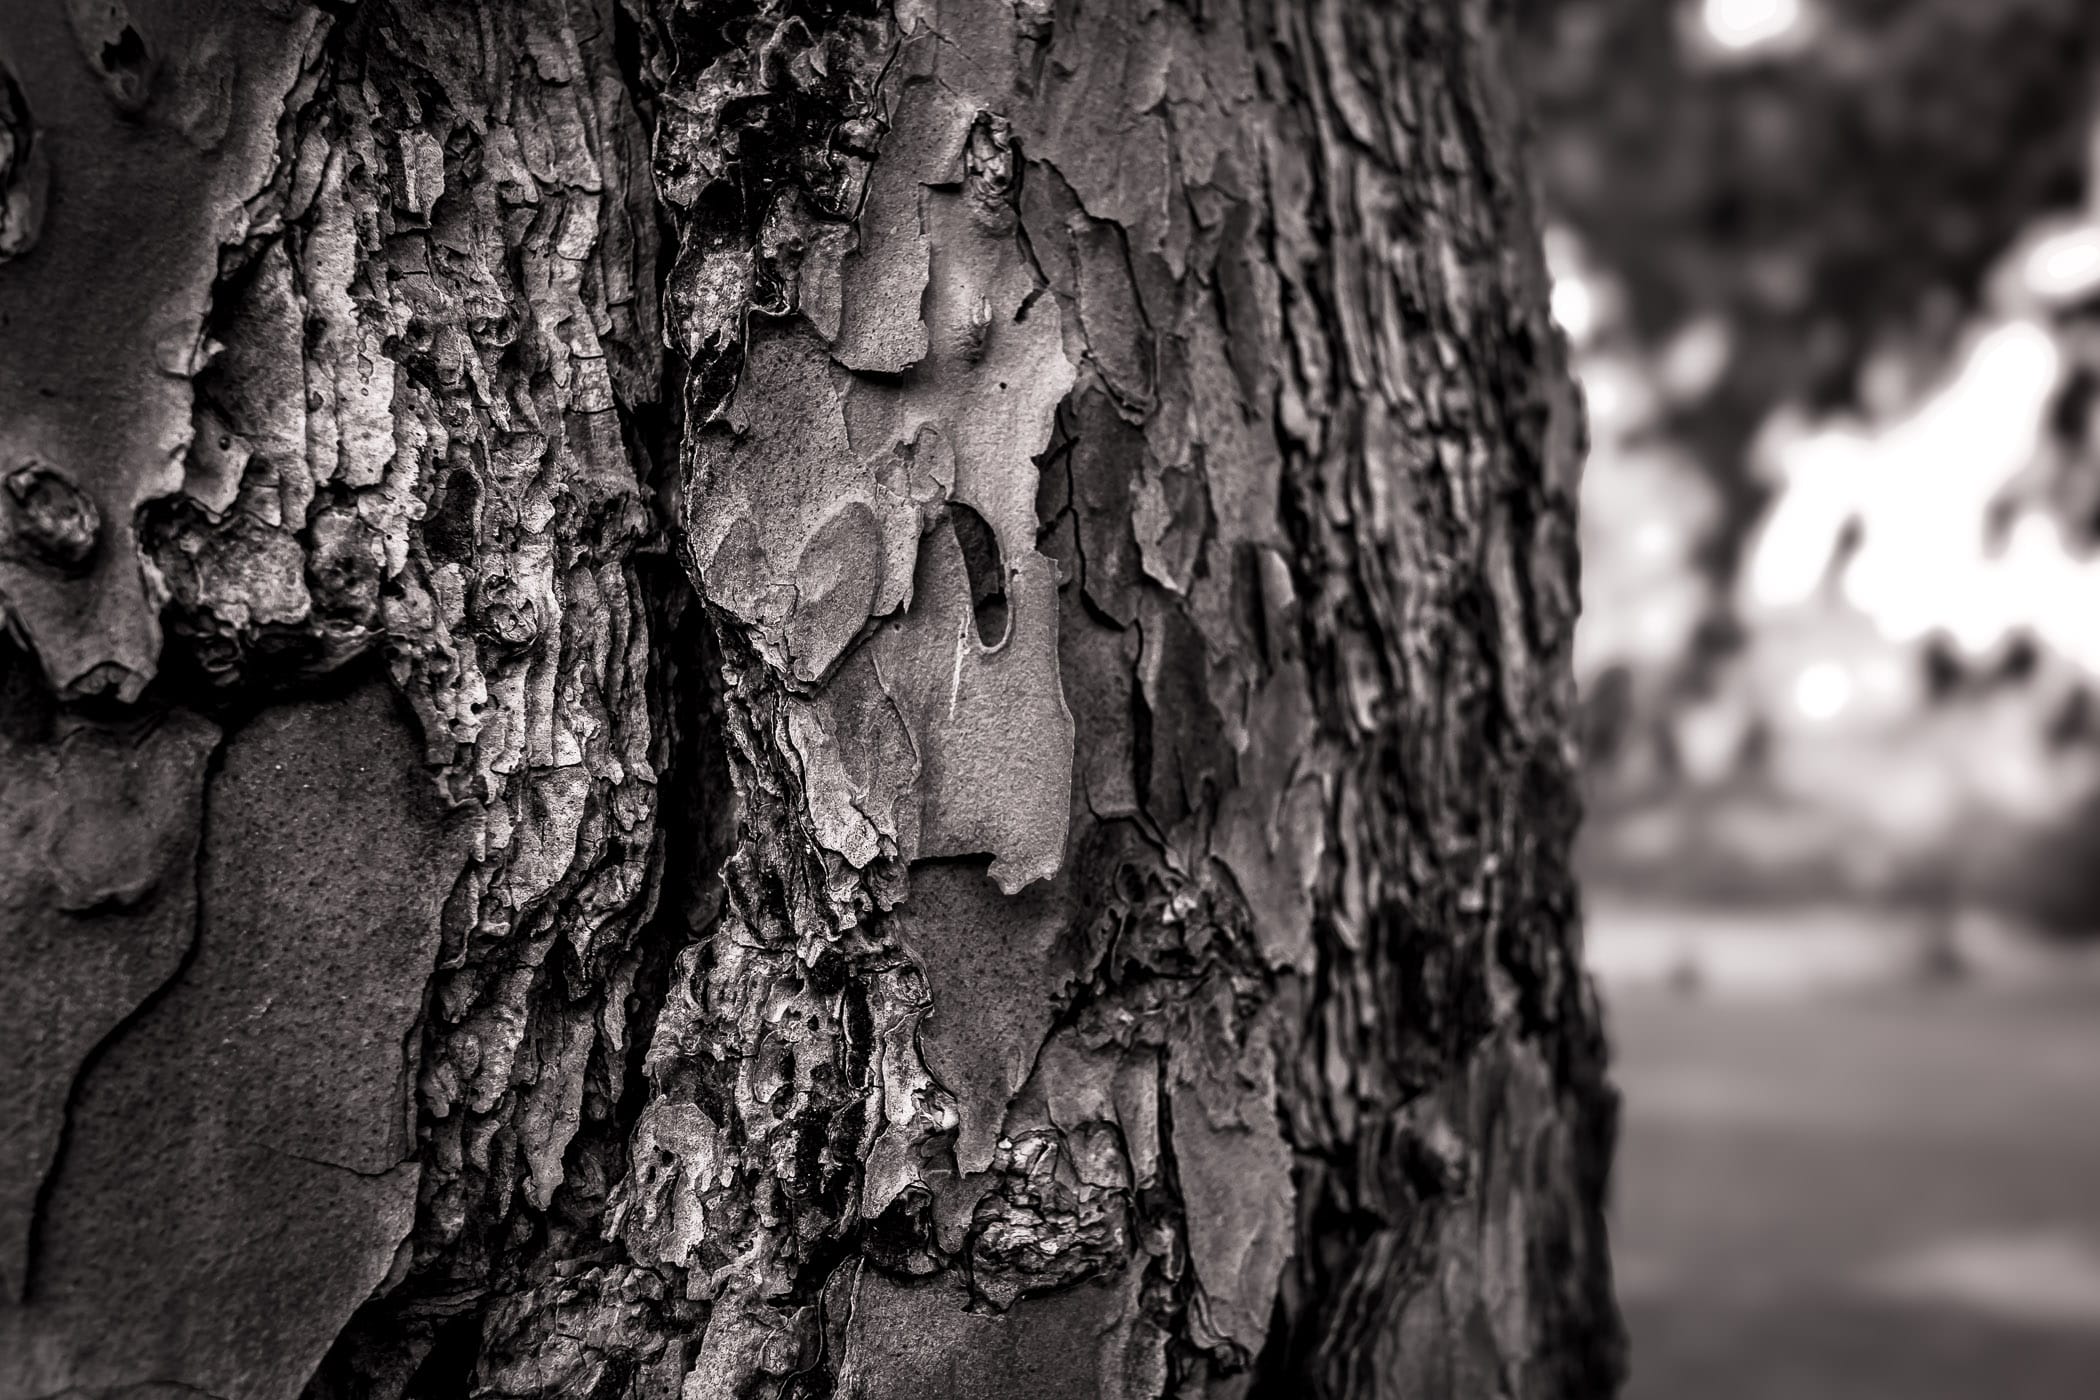 Detail of a pine tree's bark, spotted at Pollard Park, Tyler, Texas.